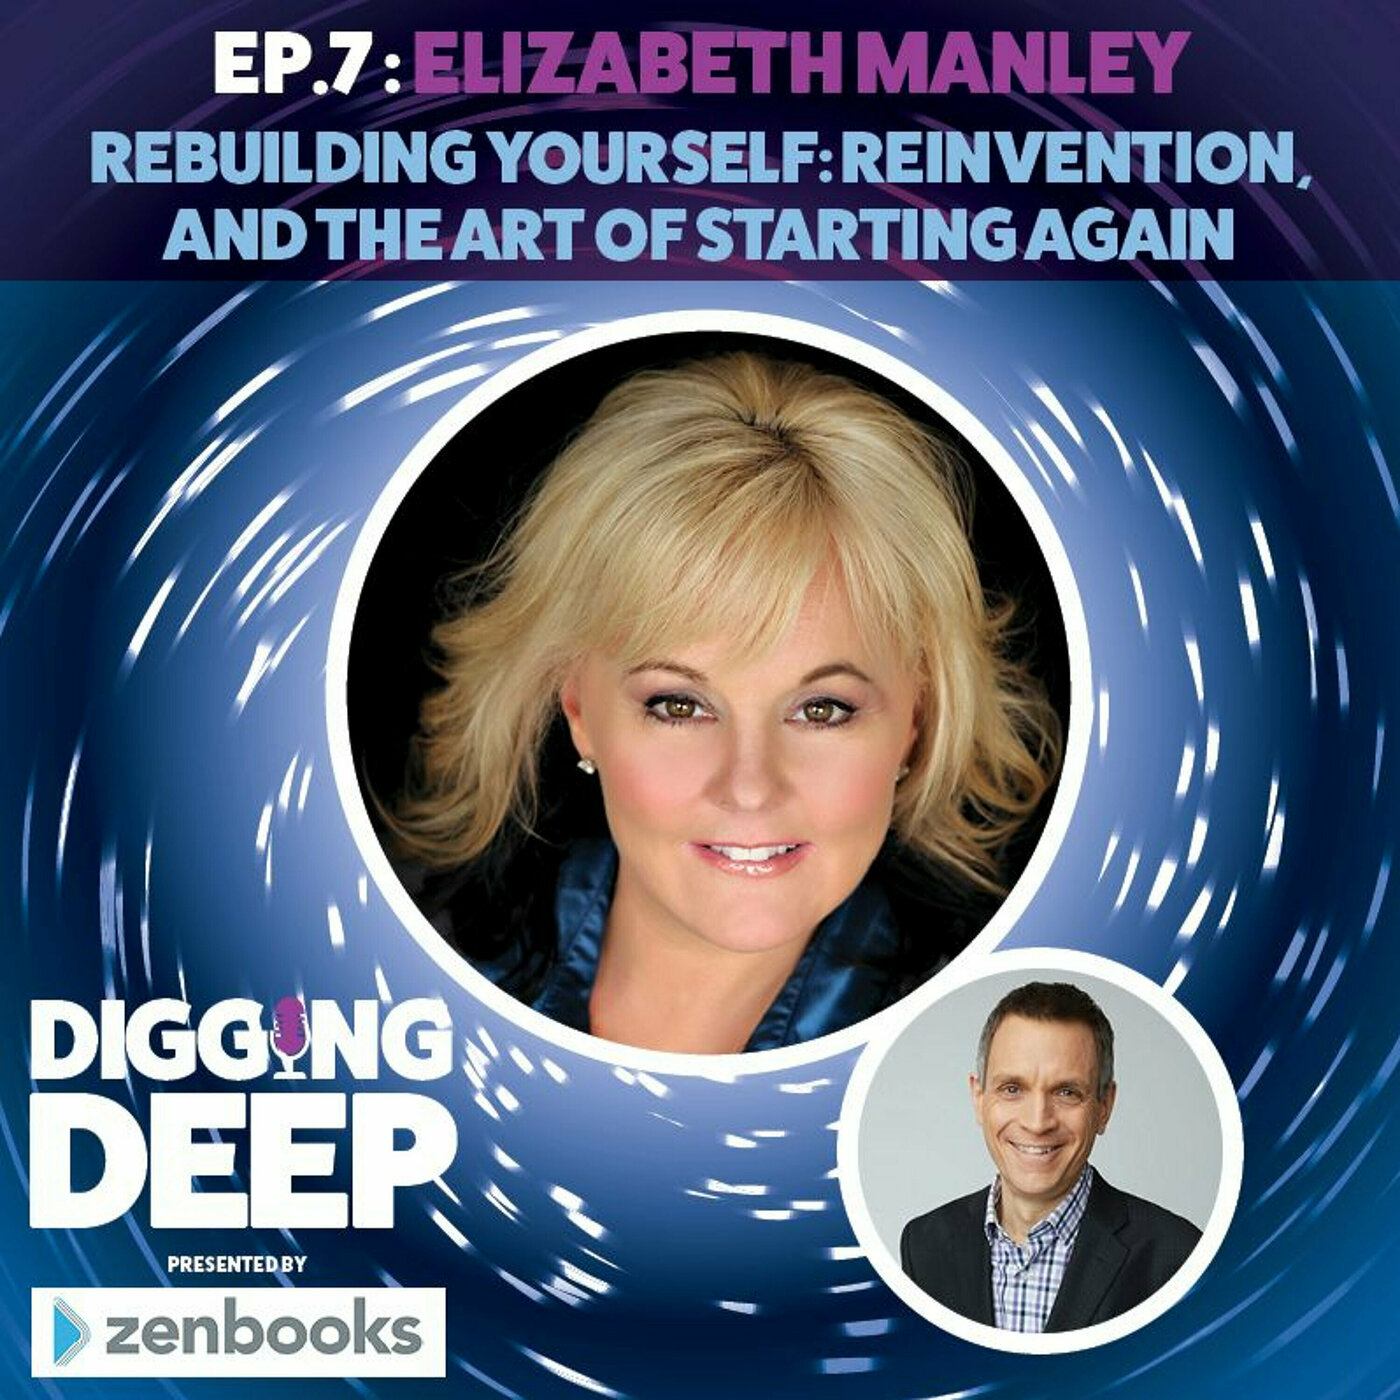 Elizabeth Manley: Rebuilding Yourself, Reinvention, and the Art of Starting Again